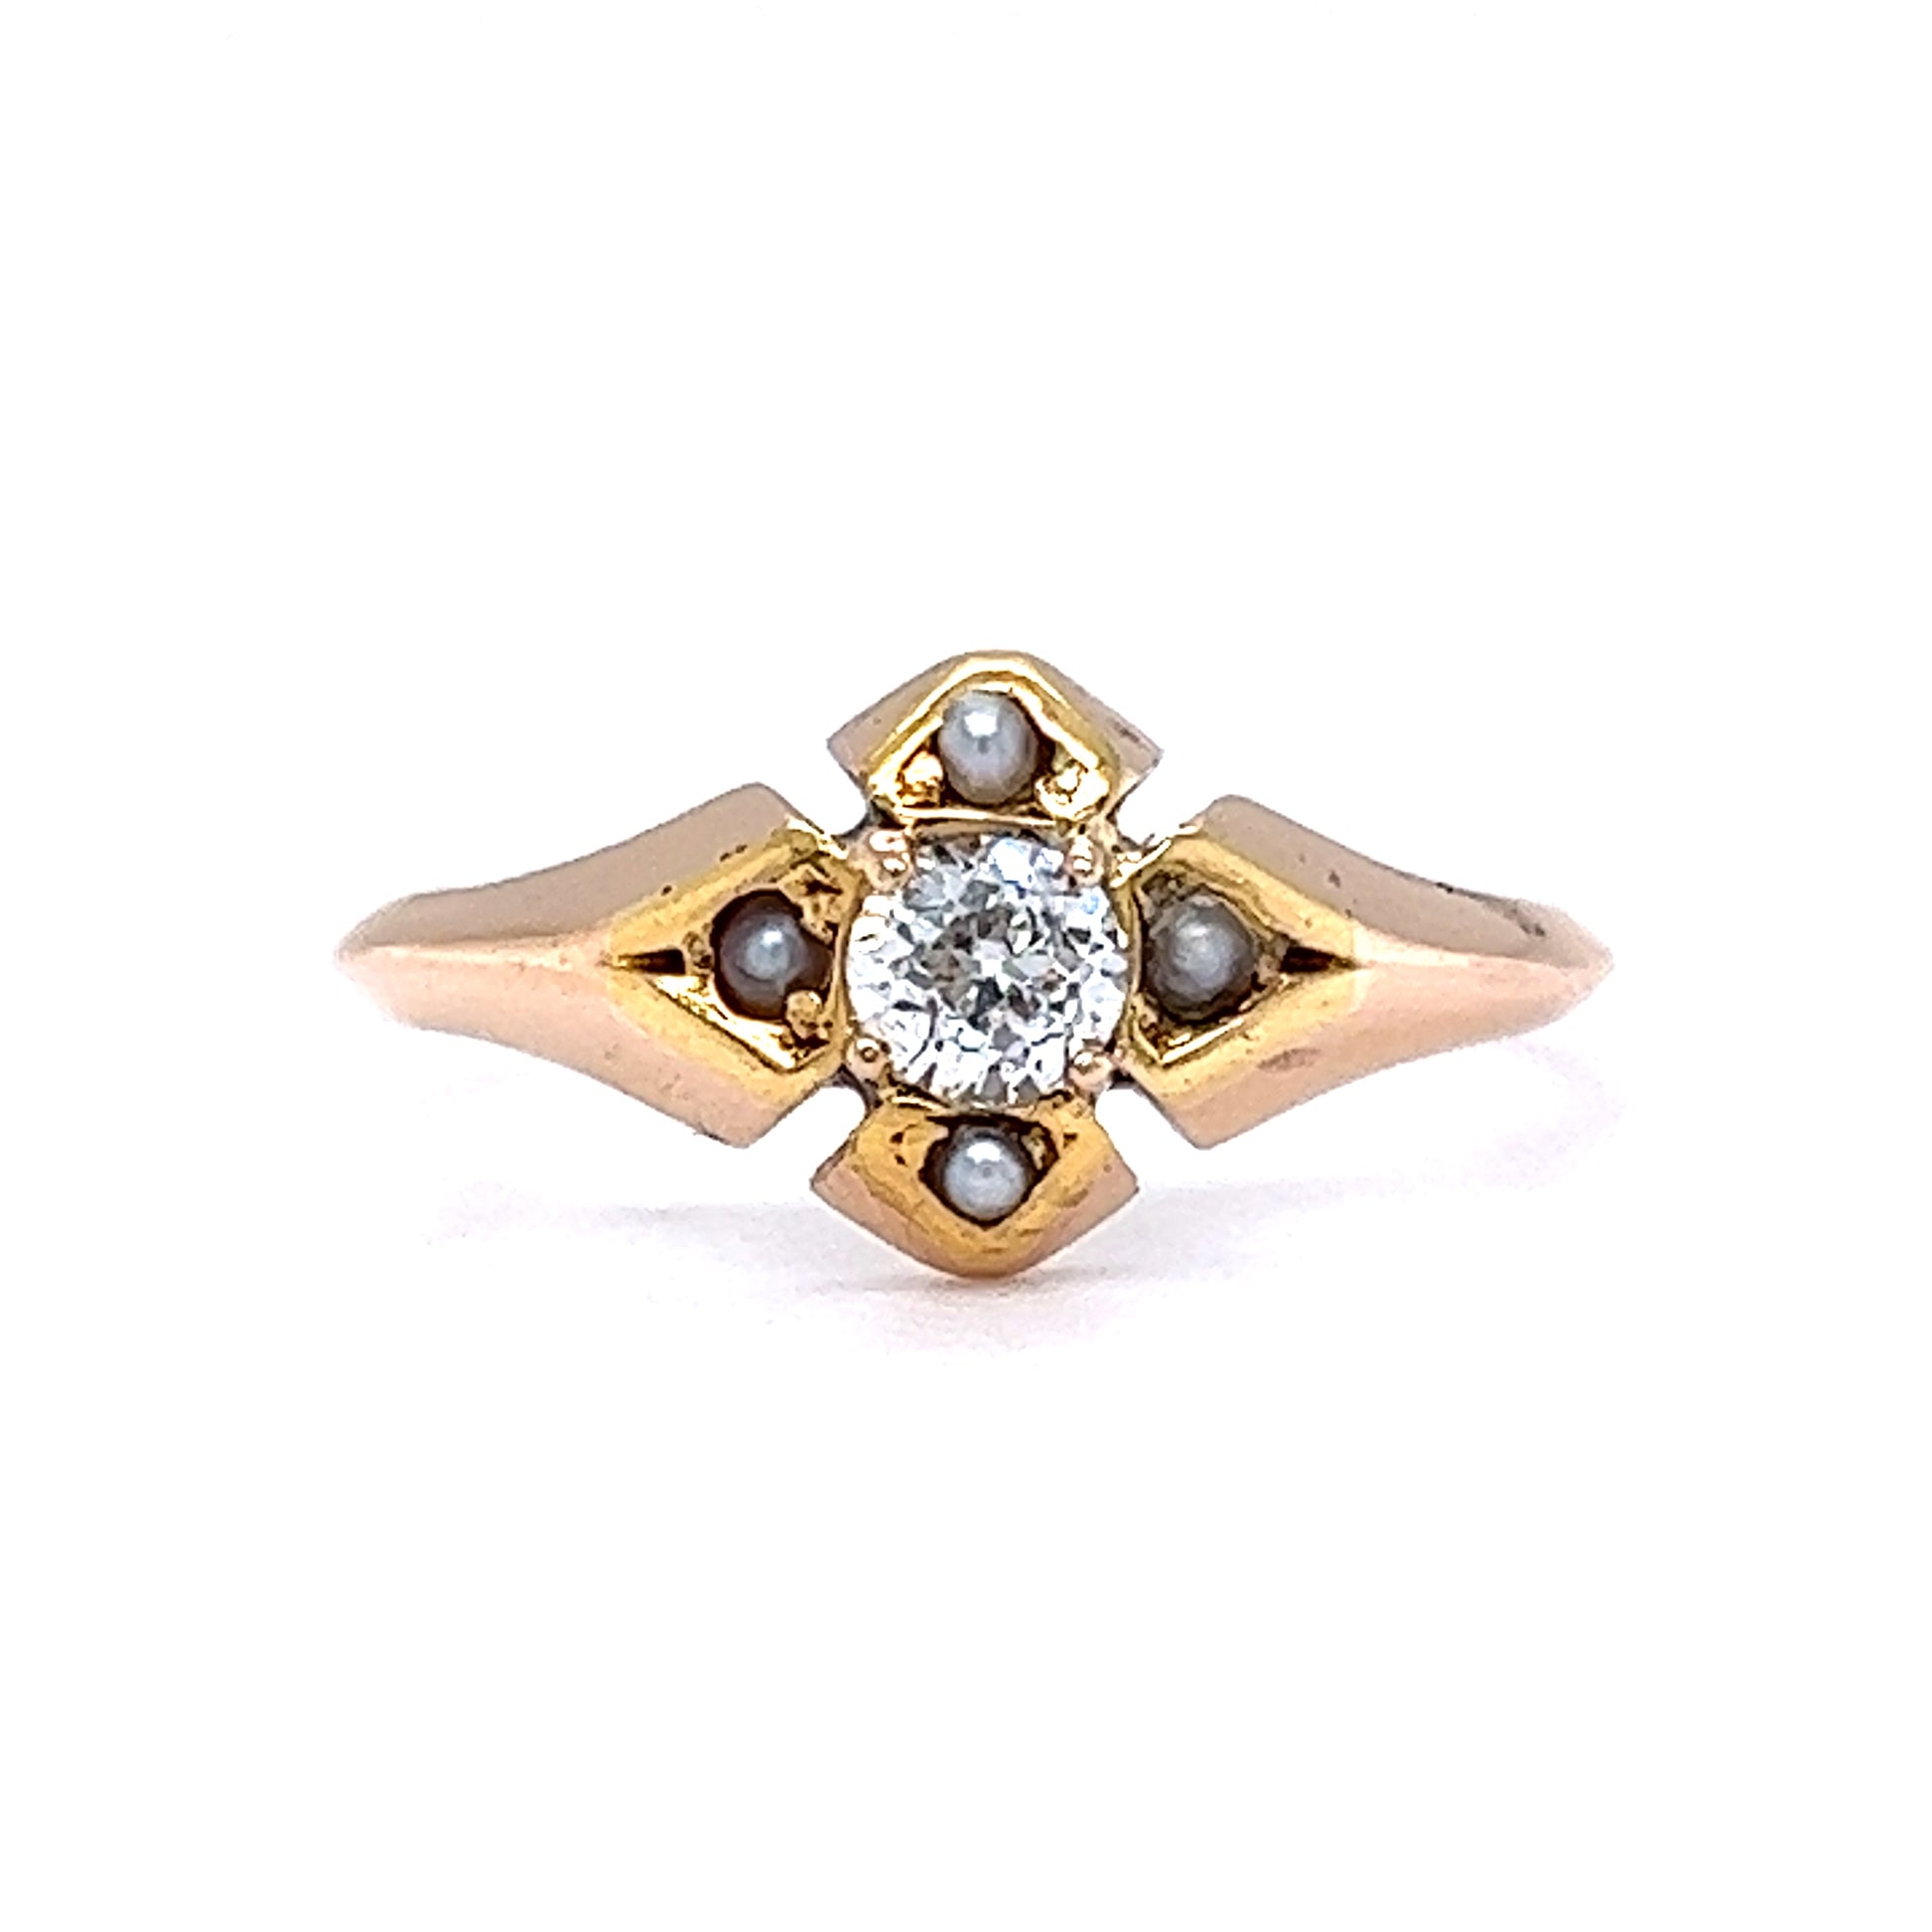 Victorian Diamond & Seed Pearl Ring in 14k Yellow GoldComposition: 14 Karat Yellow Gold Ring Size: 6.25 Total Diamond Weight: .20ct Total Gram Weight: 1.9 g Inscription: 99
      